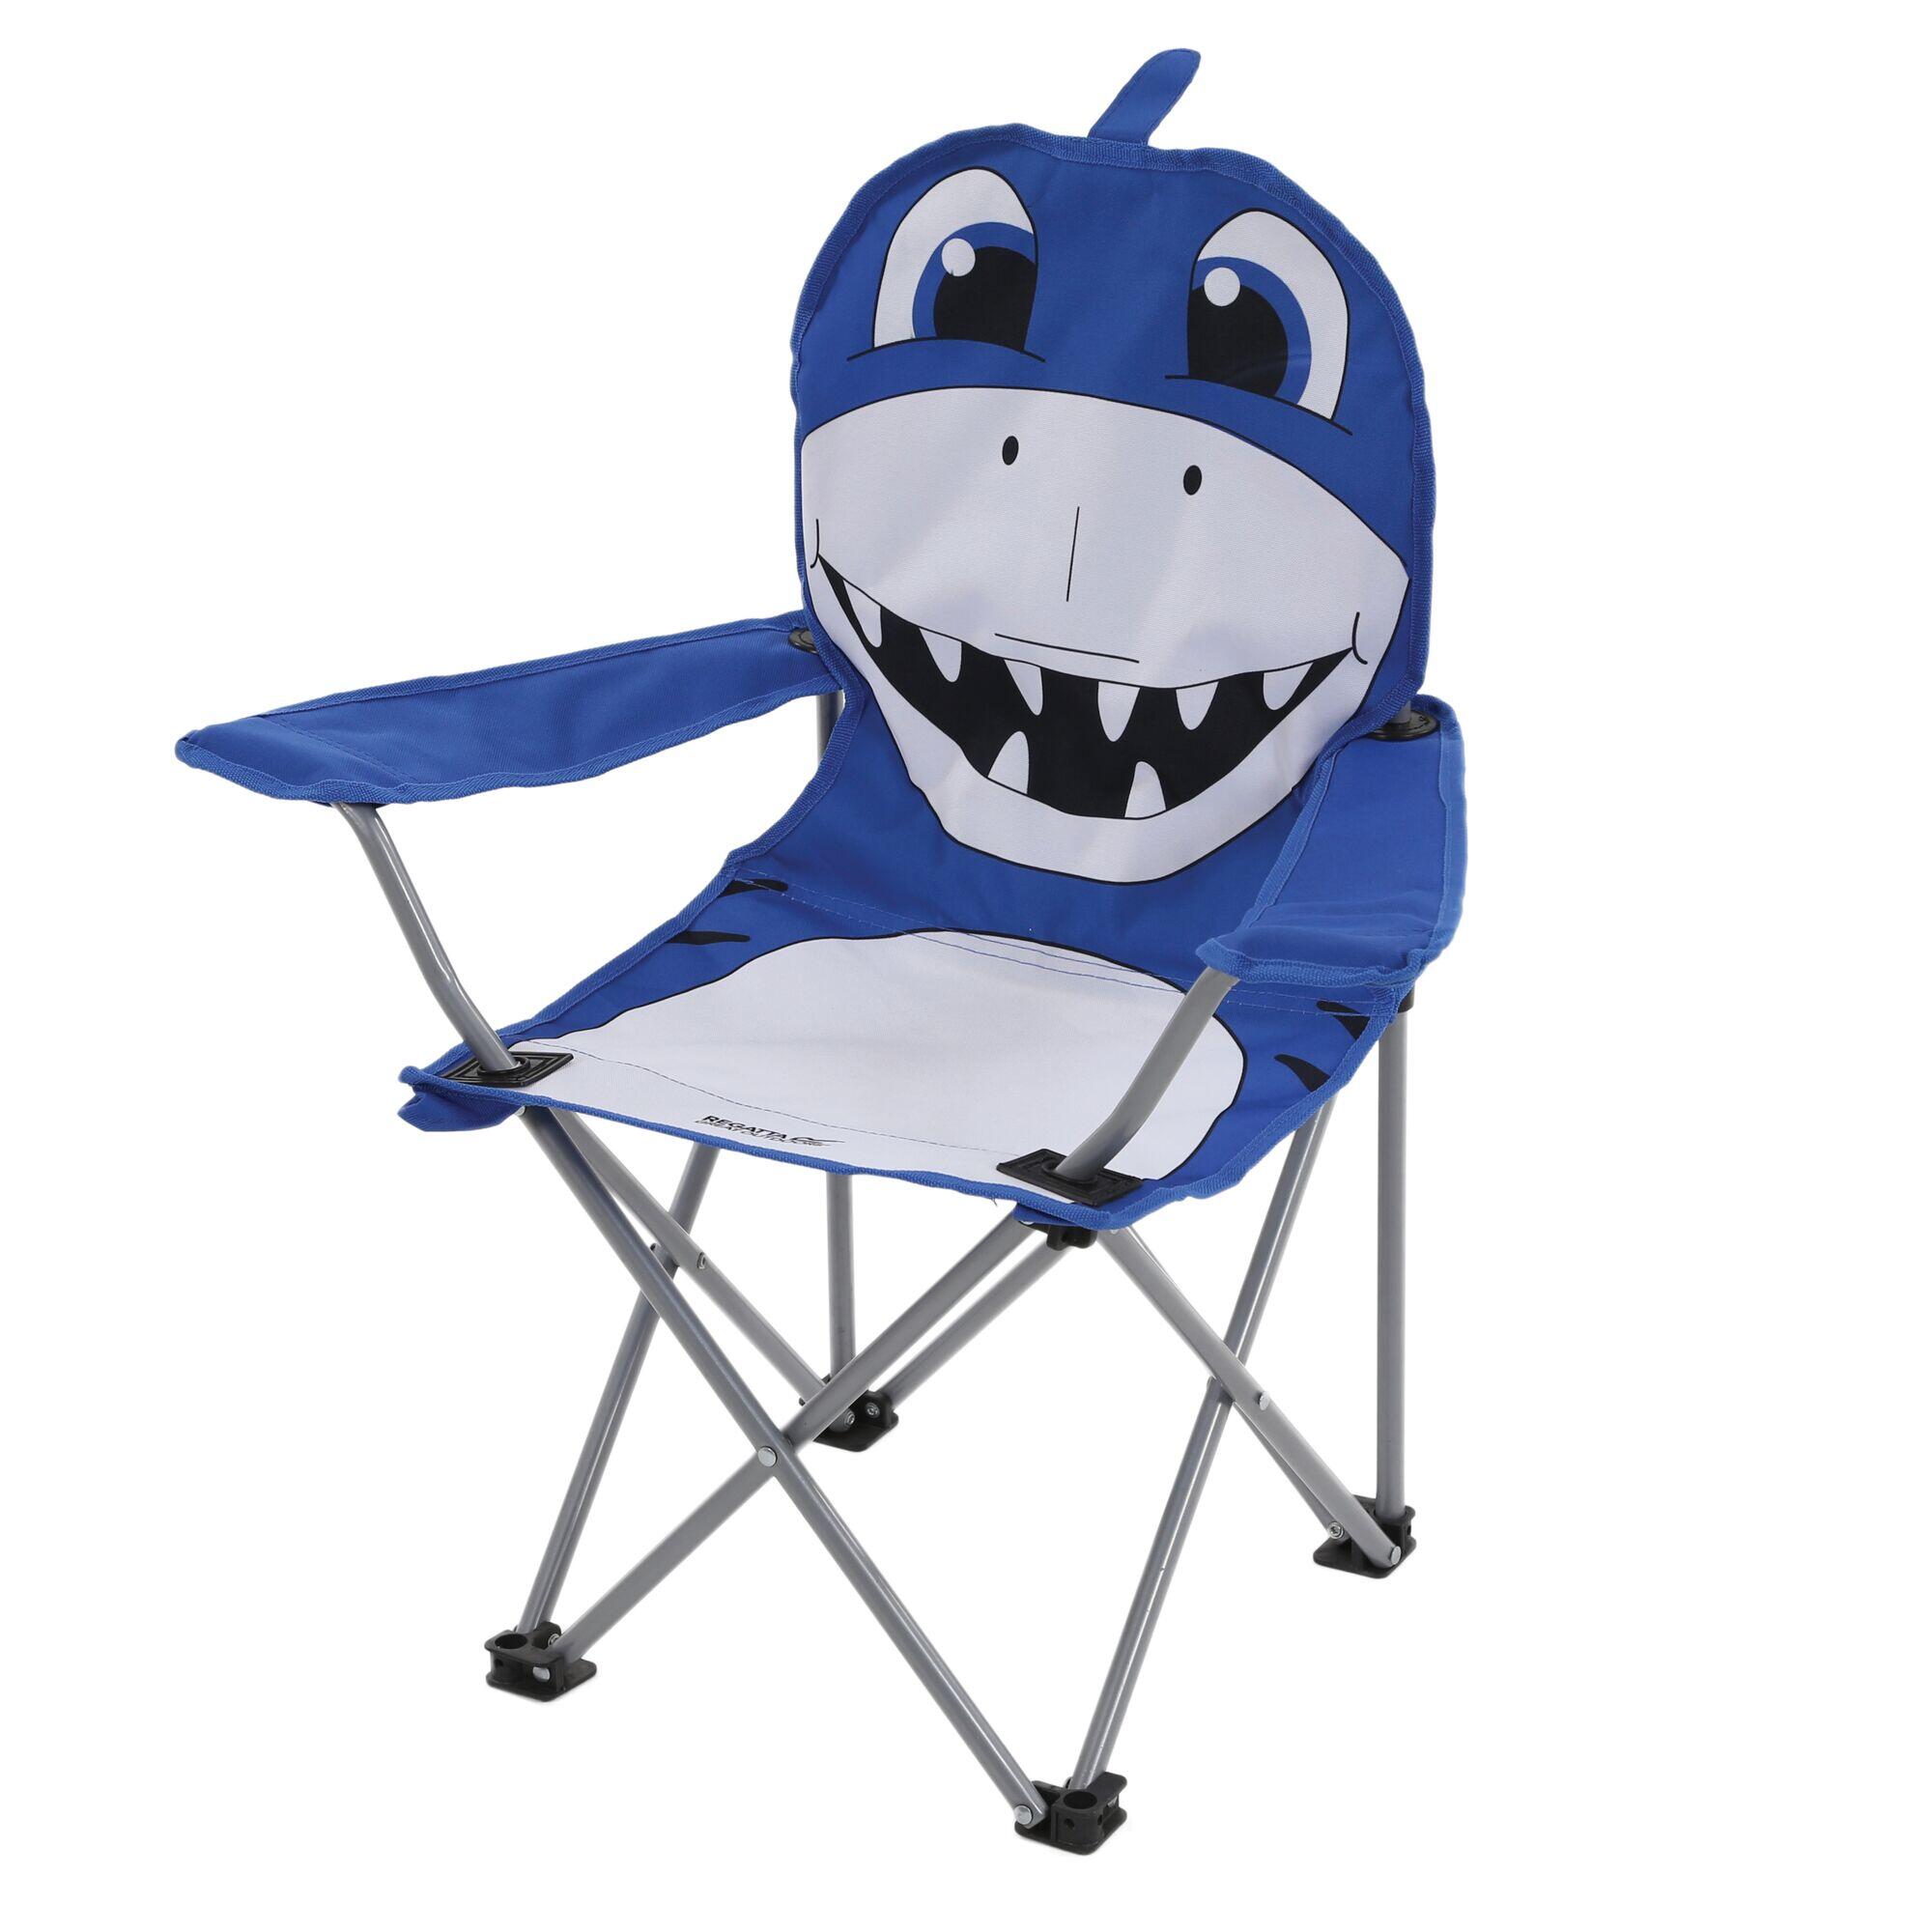 Great Outdoors Childrens/Kids Animal Camping Chair (Nautical Blue/Light Steel) 1/4